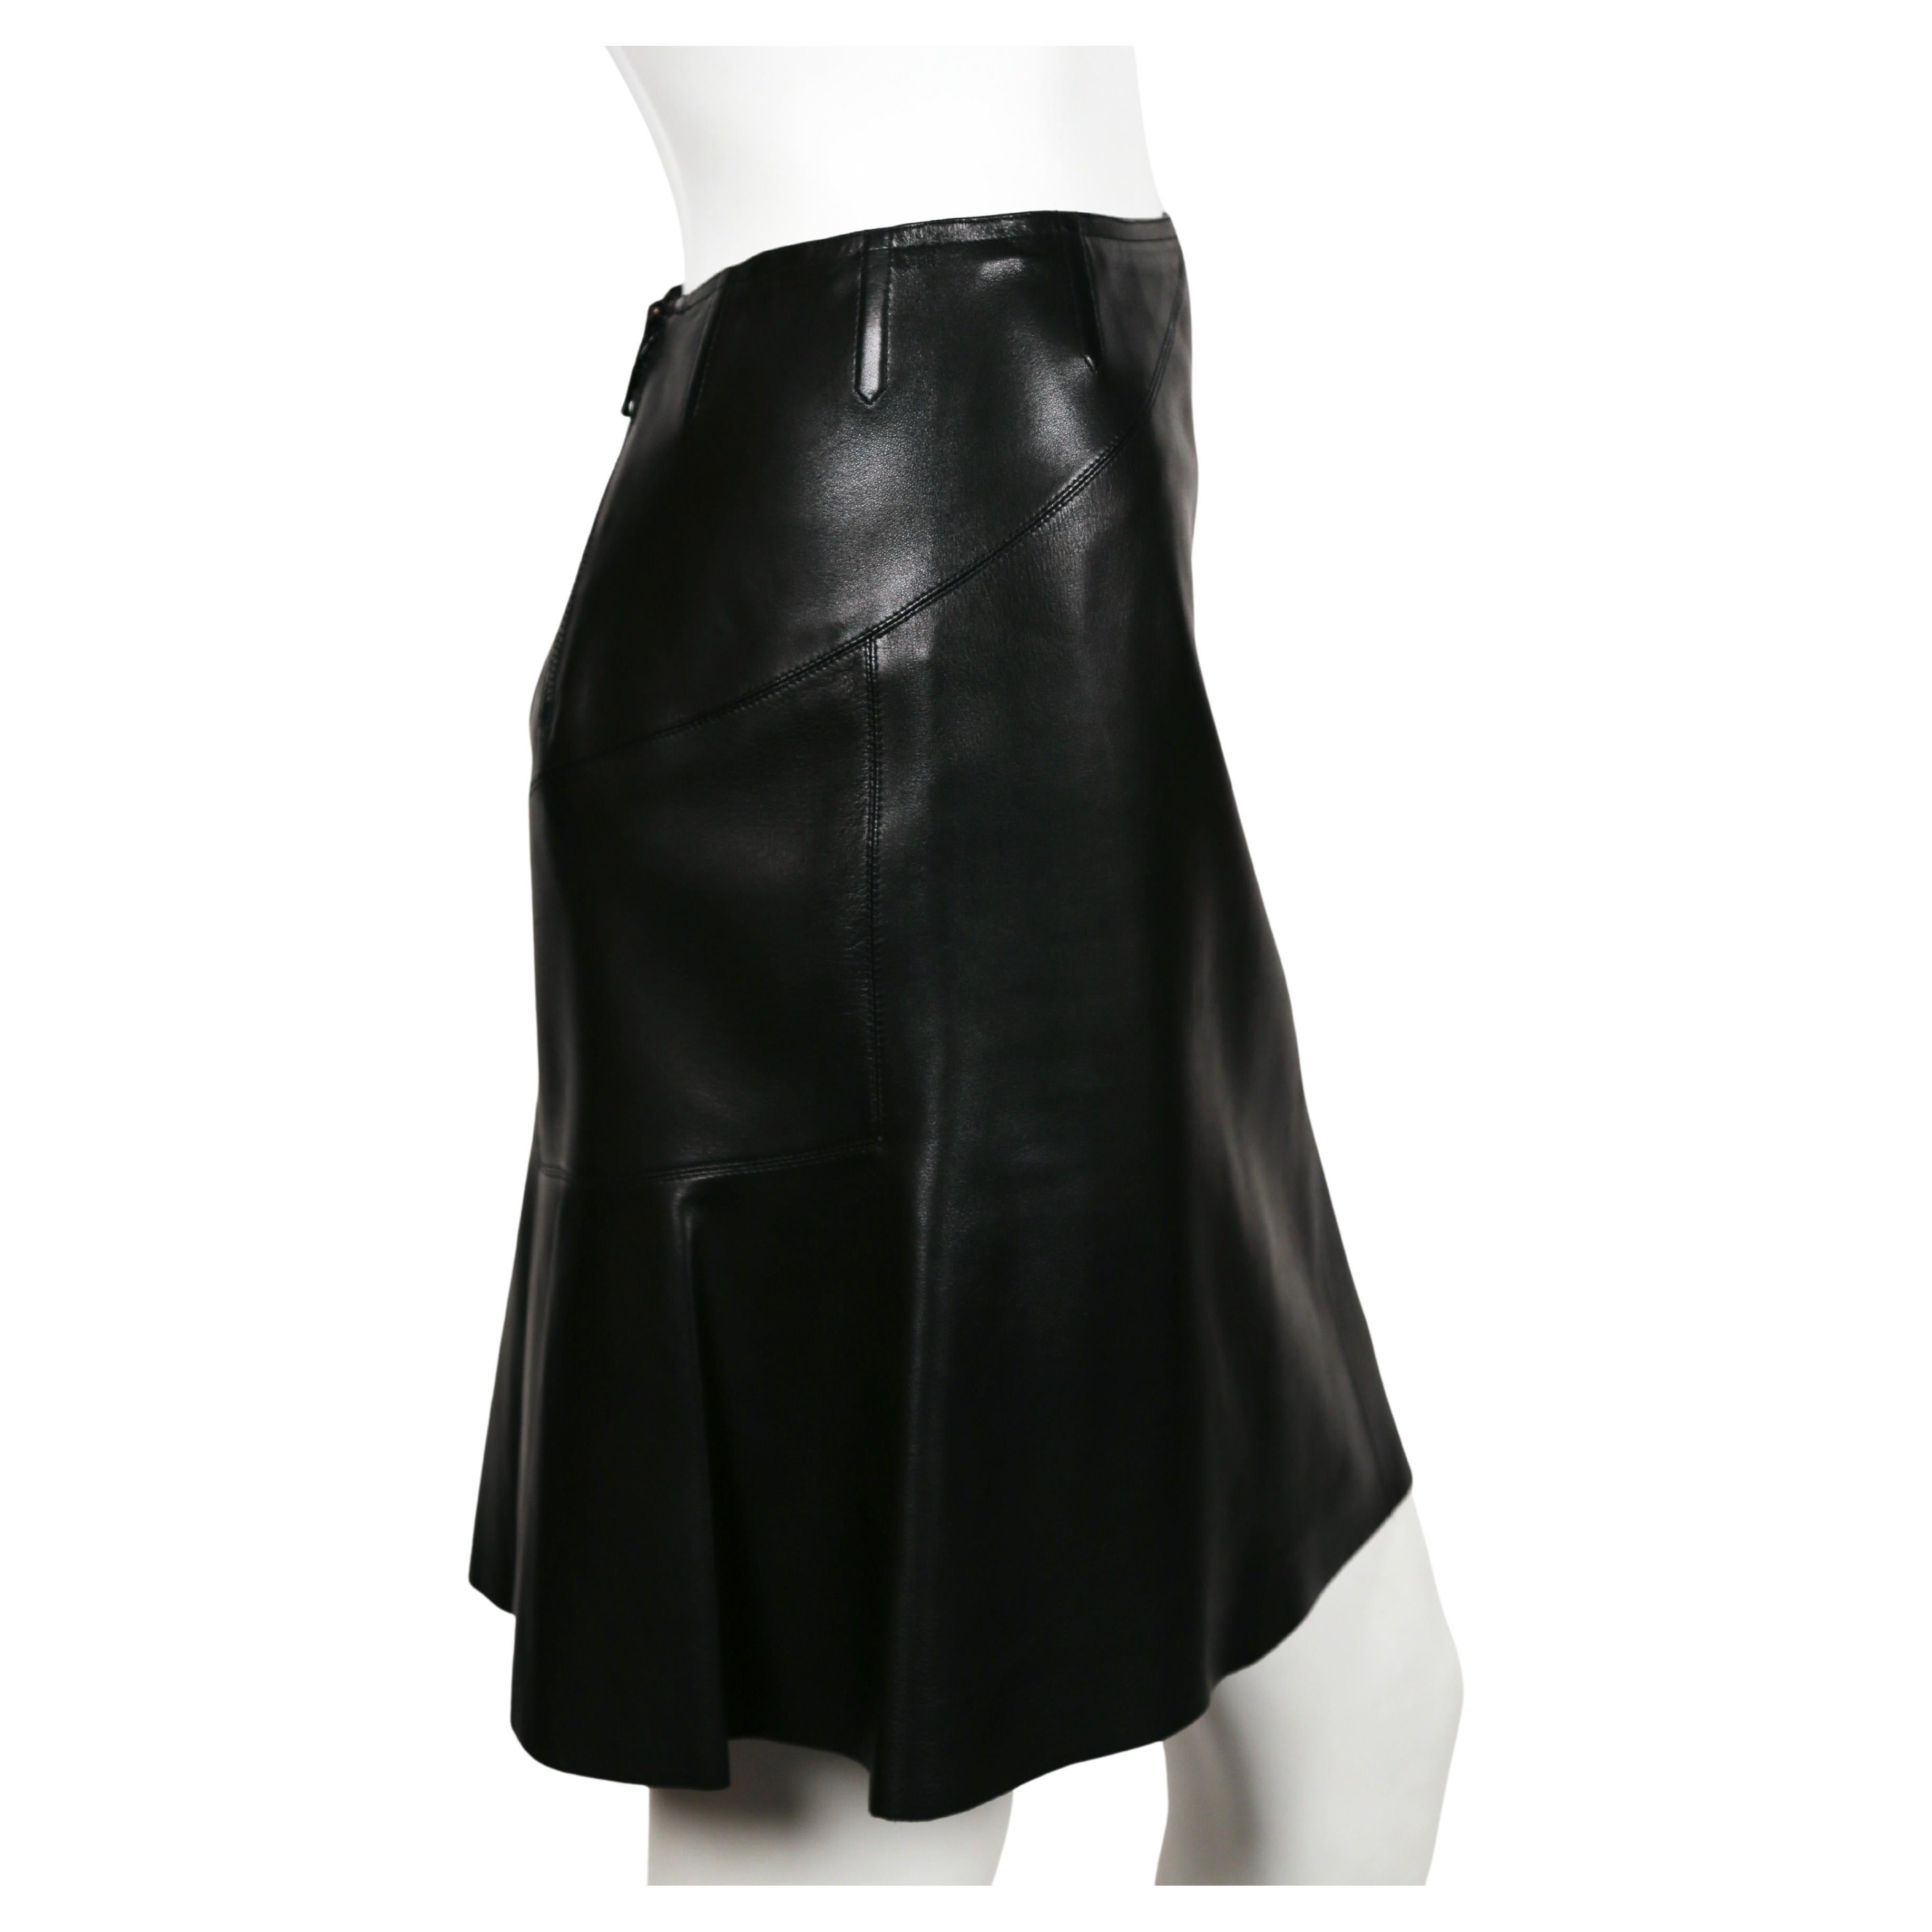 Jet-black, butter-soft leather skirt with beautiful contours and pleated hemline by Azzedine Alaia dating to the early 2000's. Very clever double zipper entry follows the line of the body. Labeled a French size 38. Approximate measurements: waist